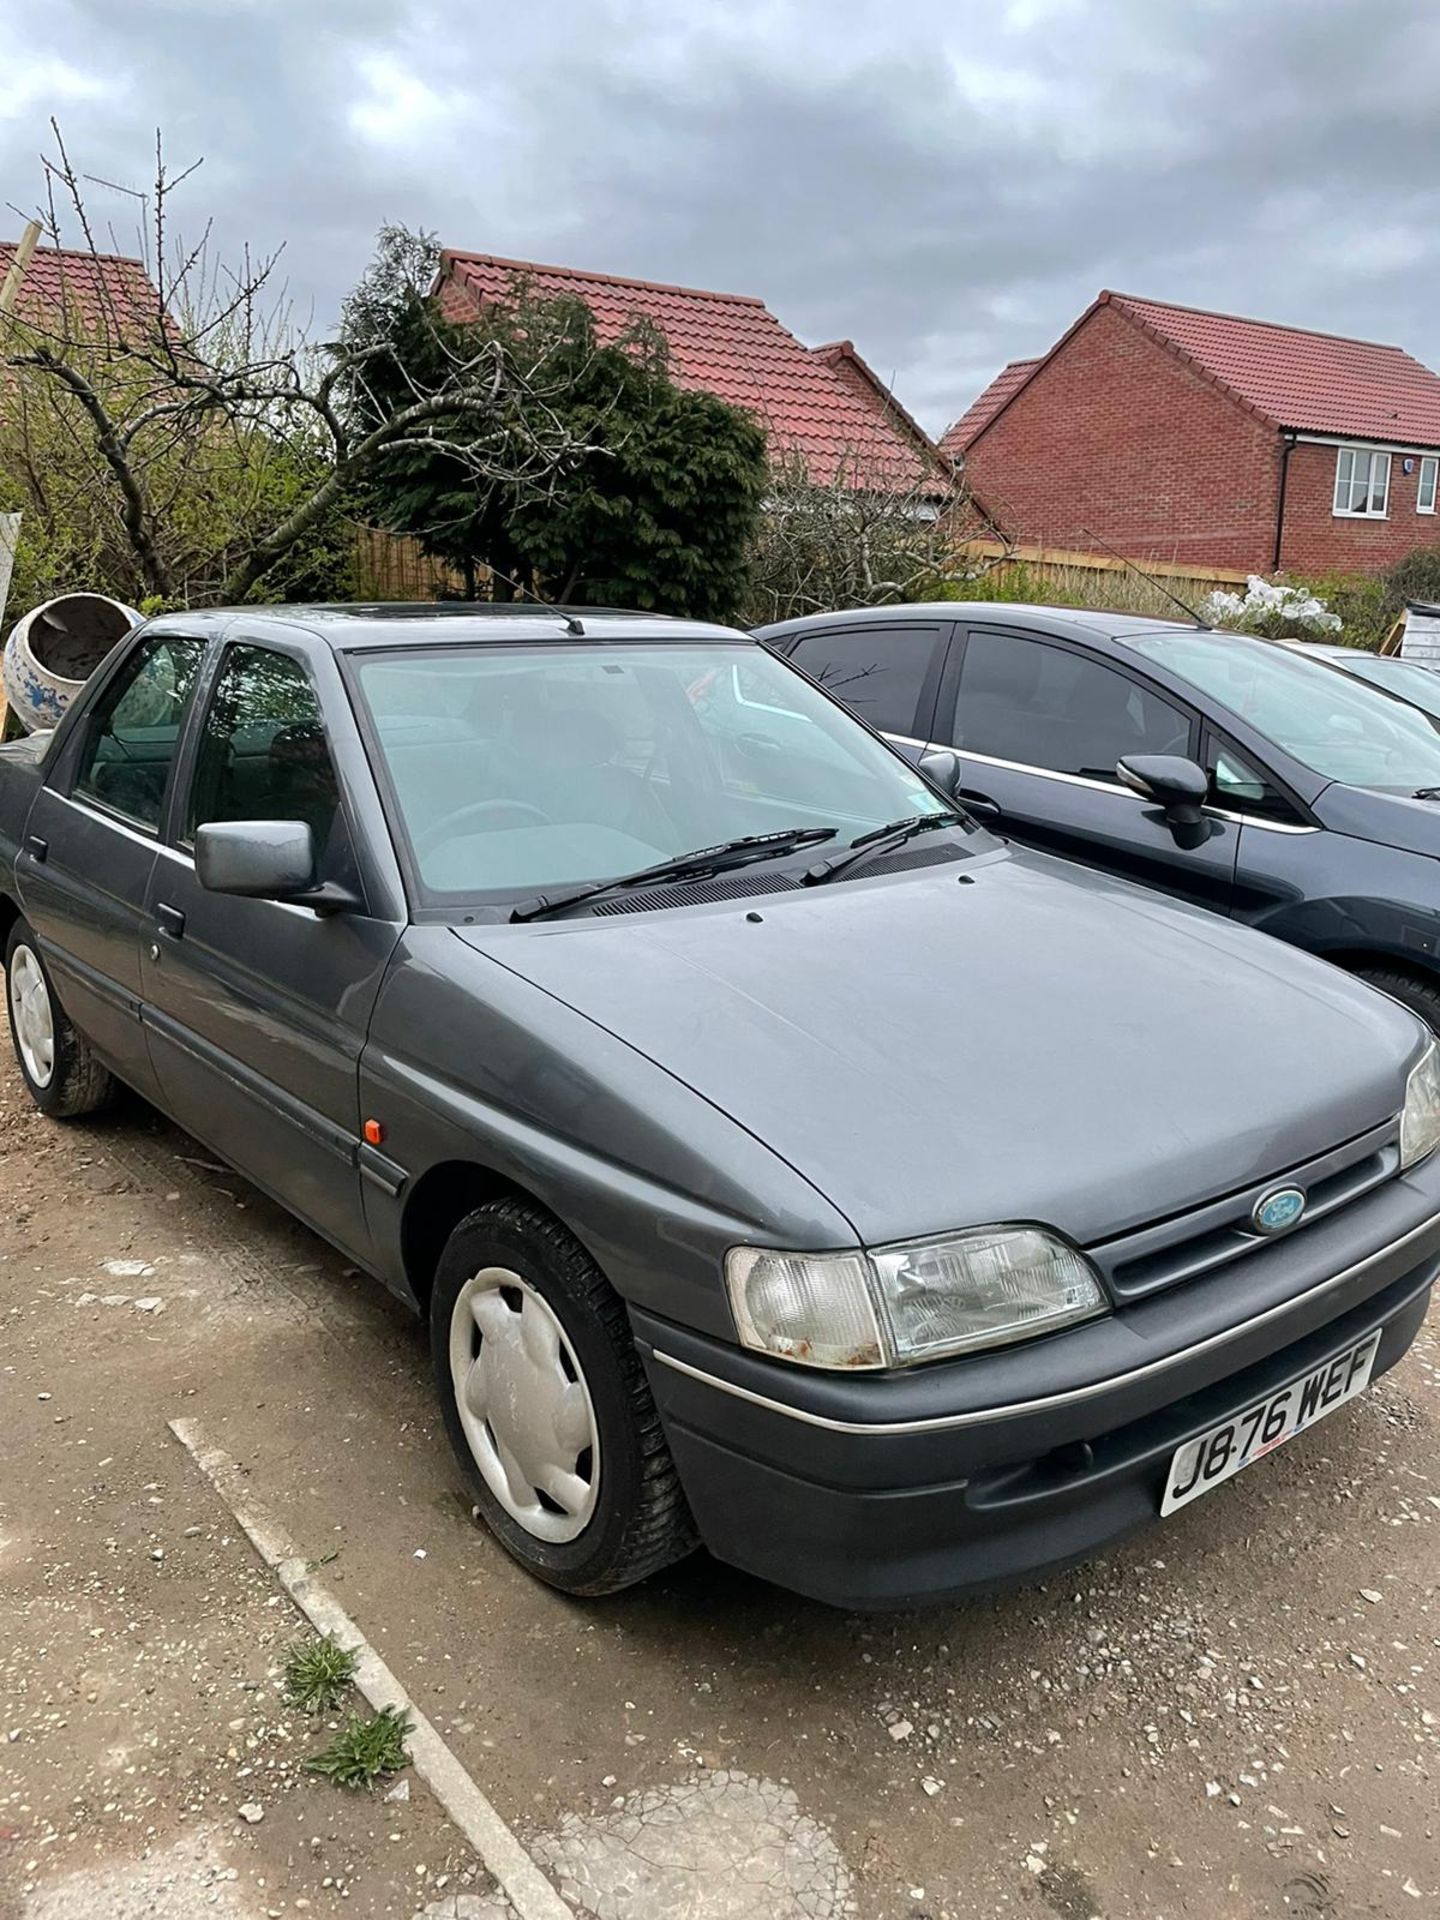 1992 FORD ORION LX AUTO, GREY, PETROL, AUTO VARIABLE 1 GEARS, 4 PREVIOUS KEEPERS, NO VAT - Image 2 of 8